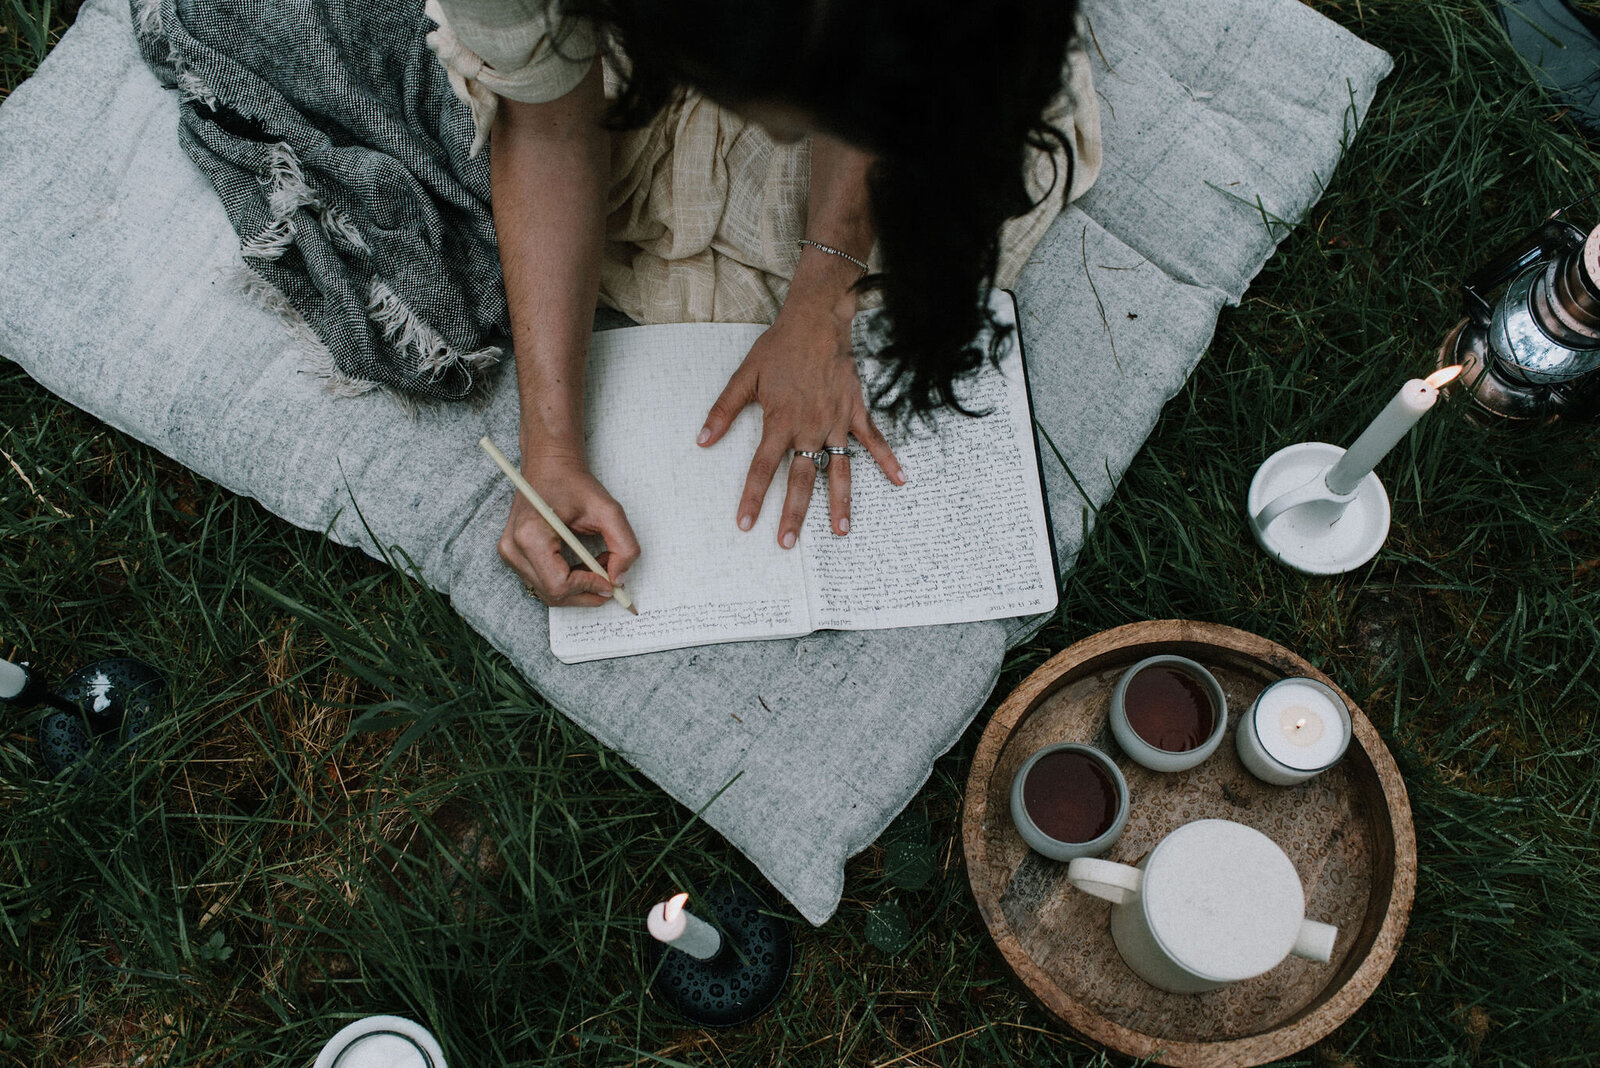 a woman is writing in a journal placed on a pillow on the grass, next to candles and tea, all covered in raindrops